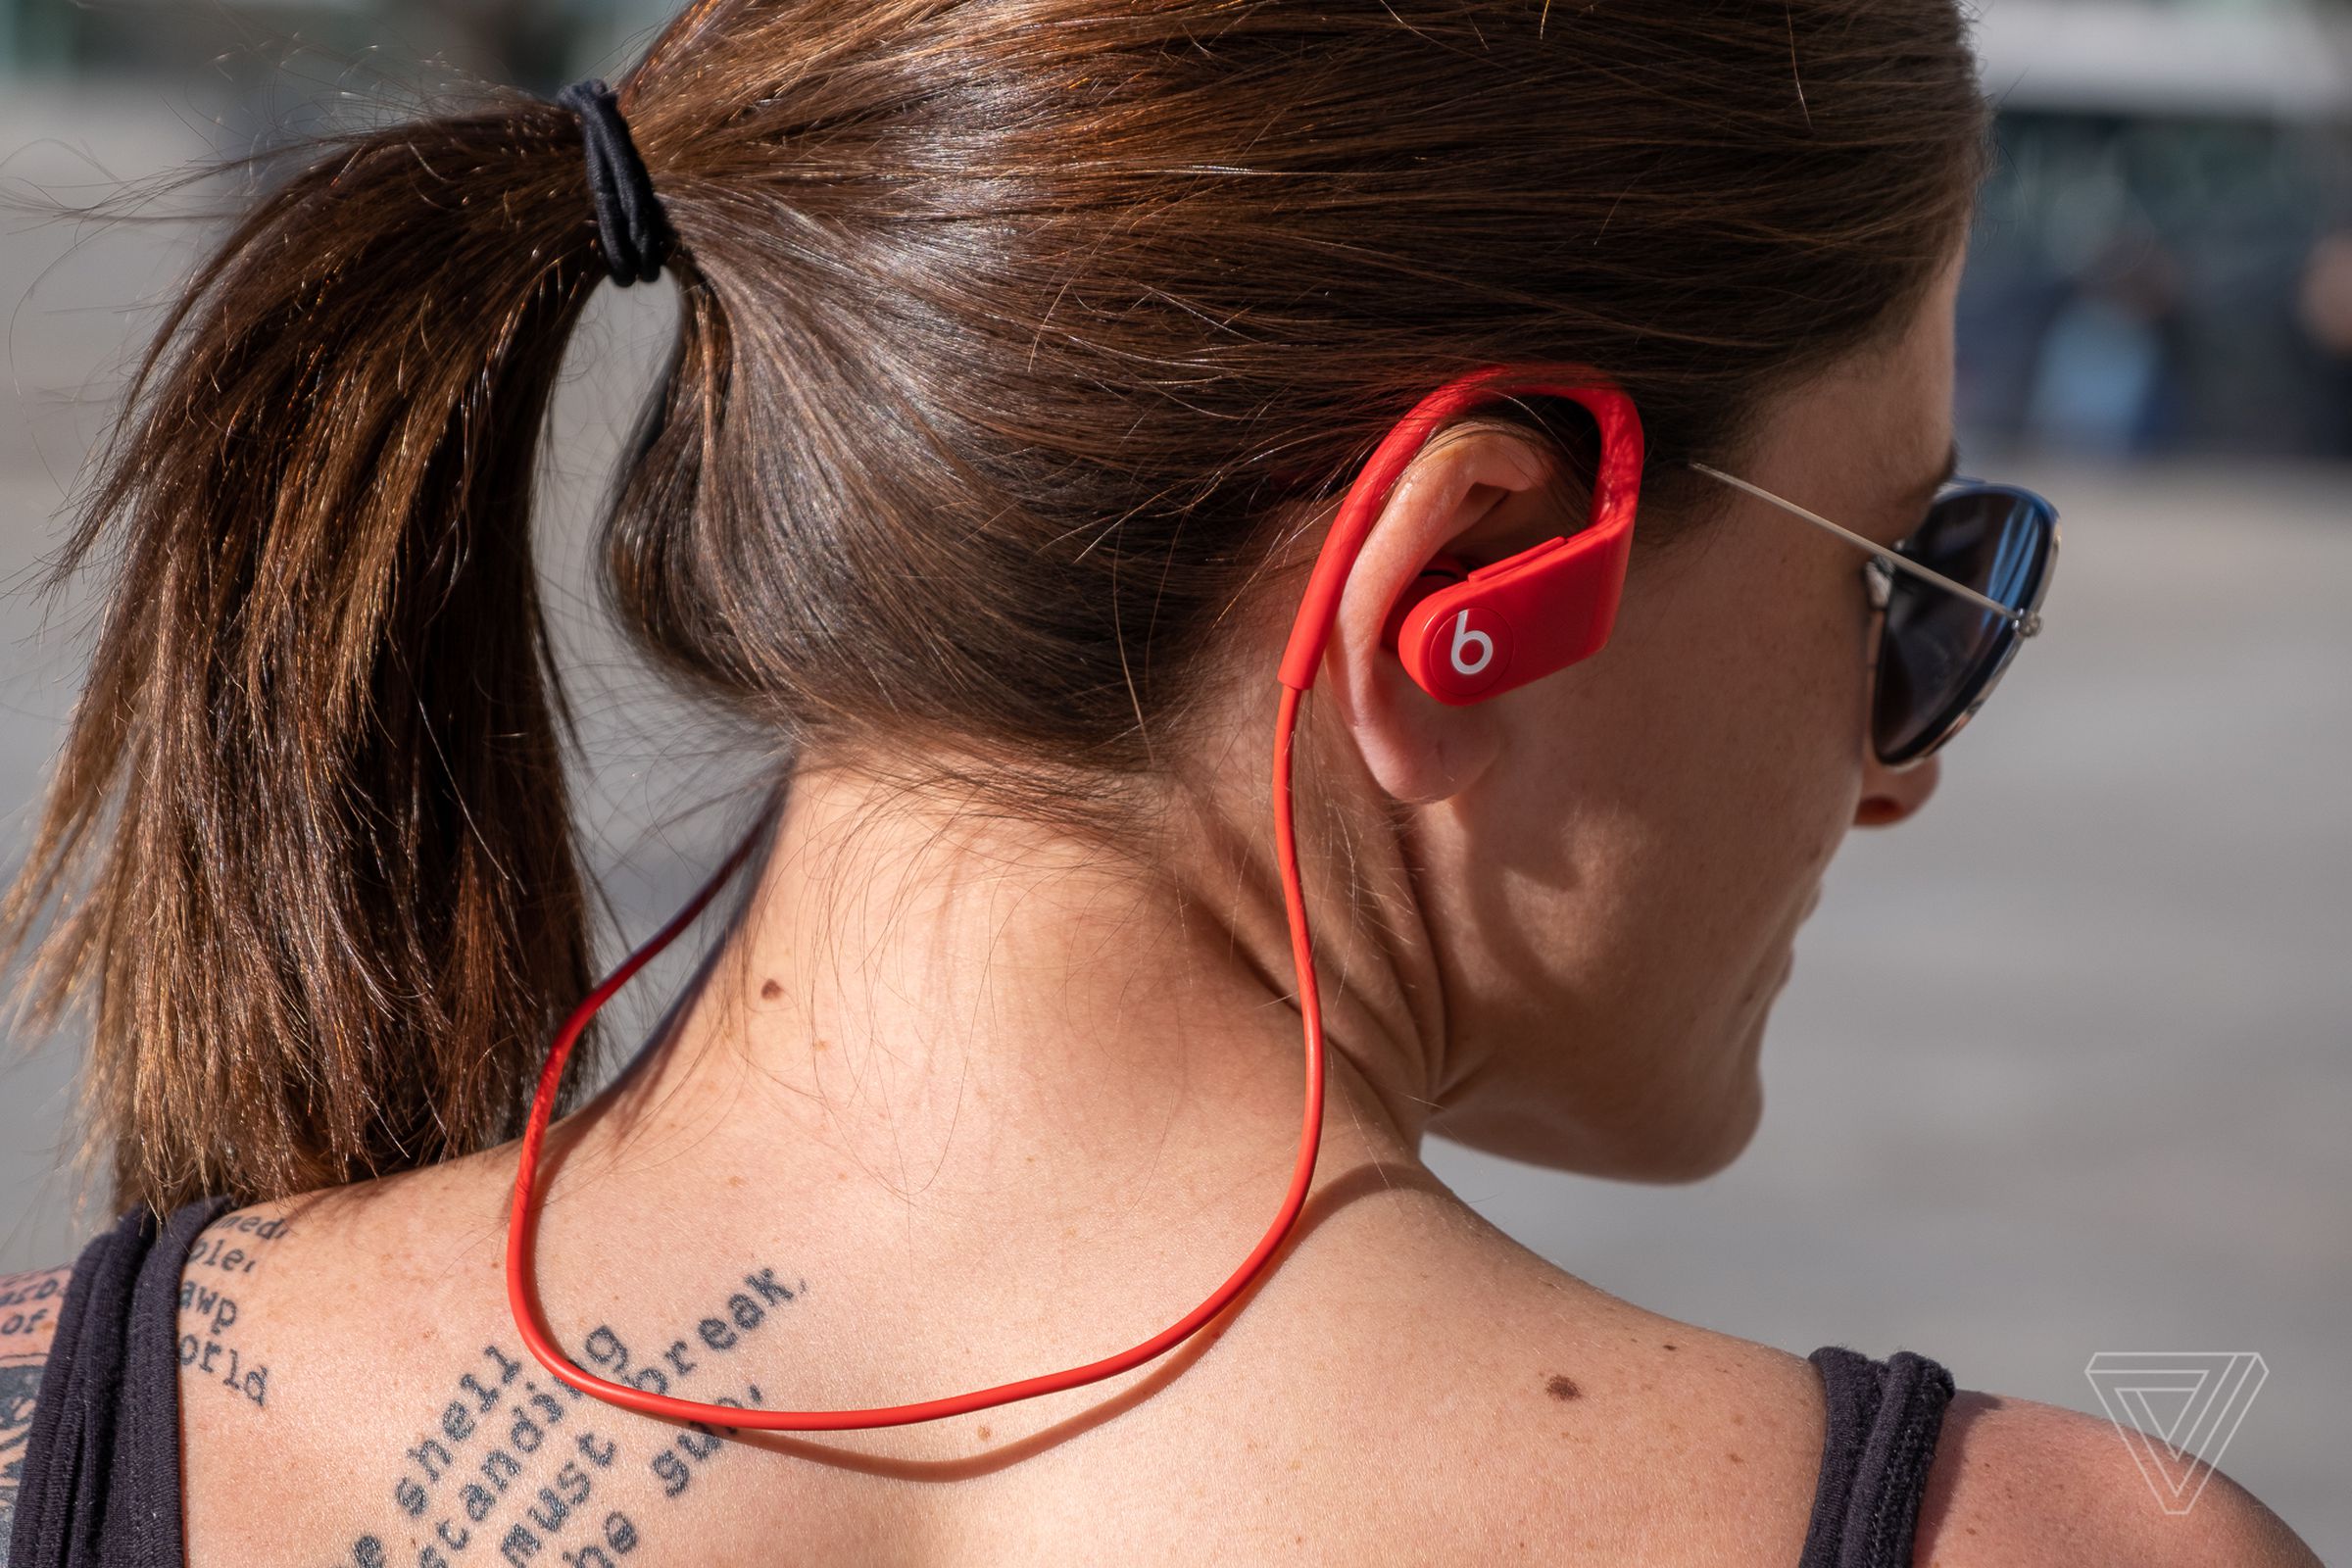 The Powerbeats neckbuds are also discontinued as of today.